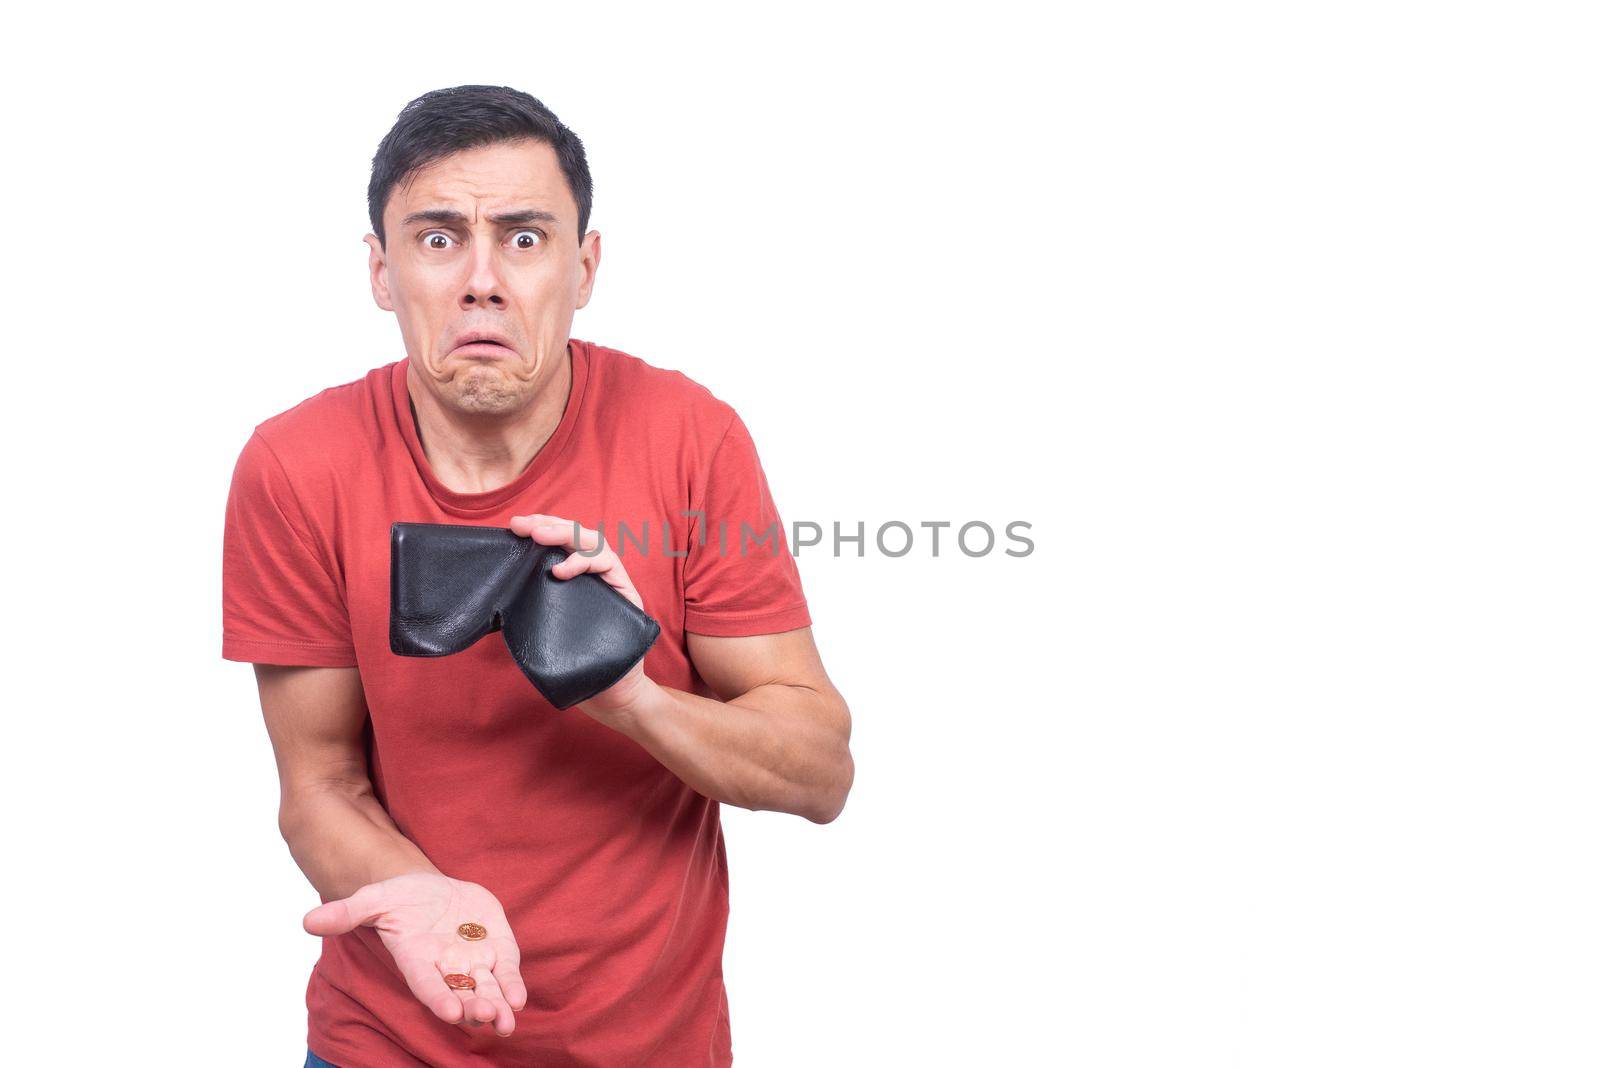 Discouraged male holding few coins and wallet while looking at camera with grimace against blank background in studio